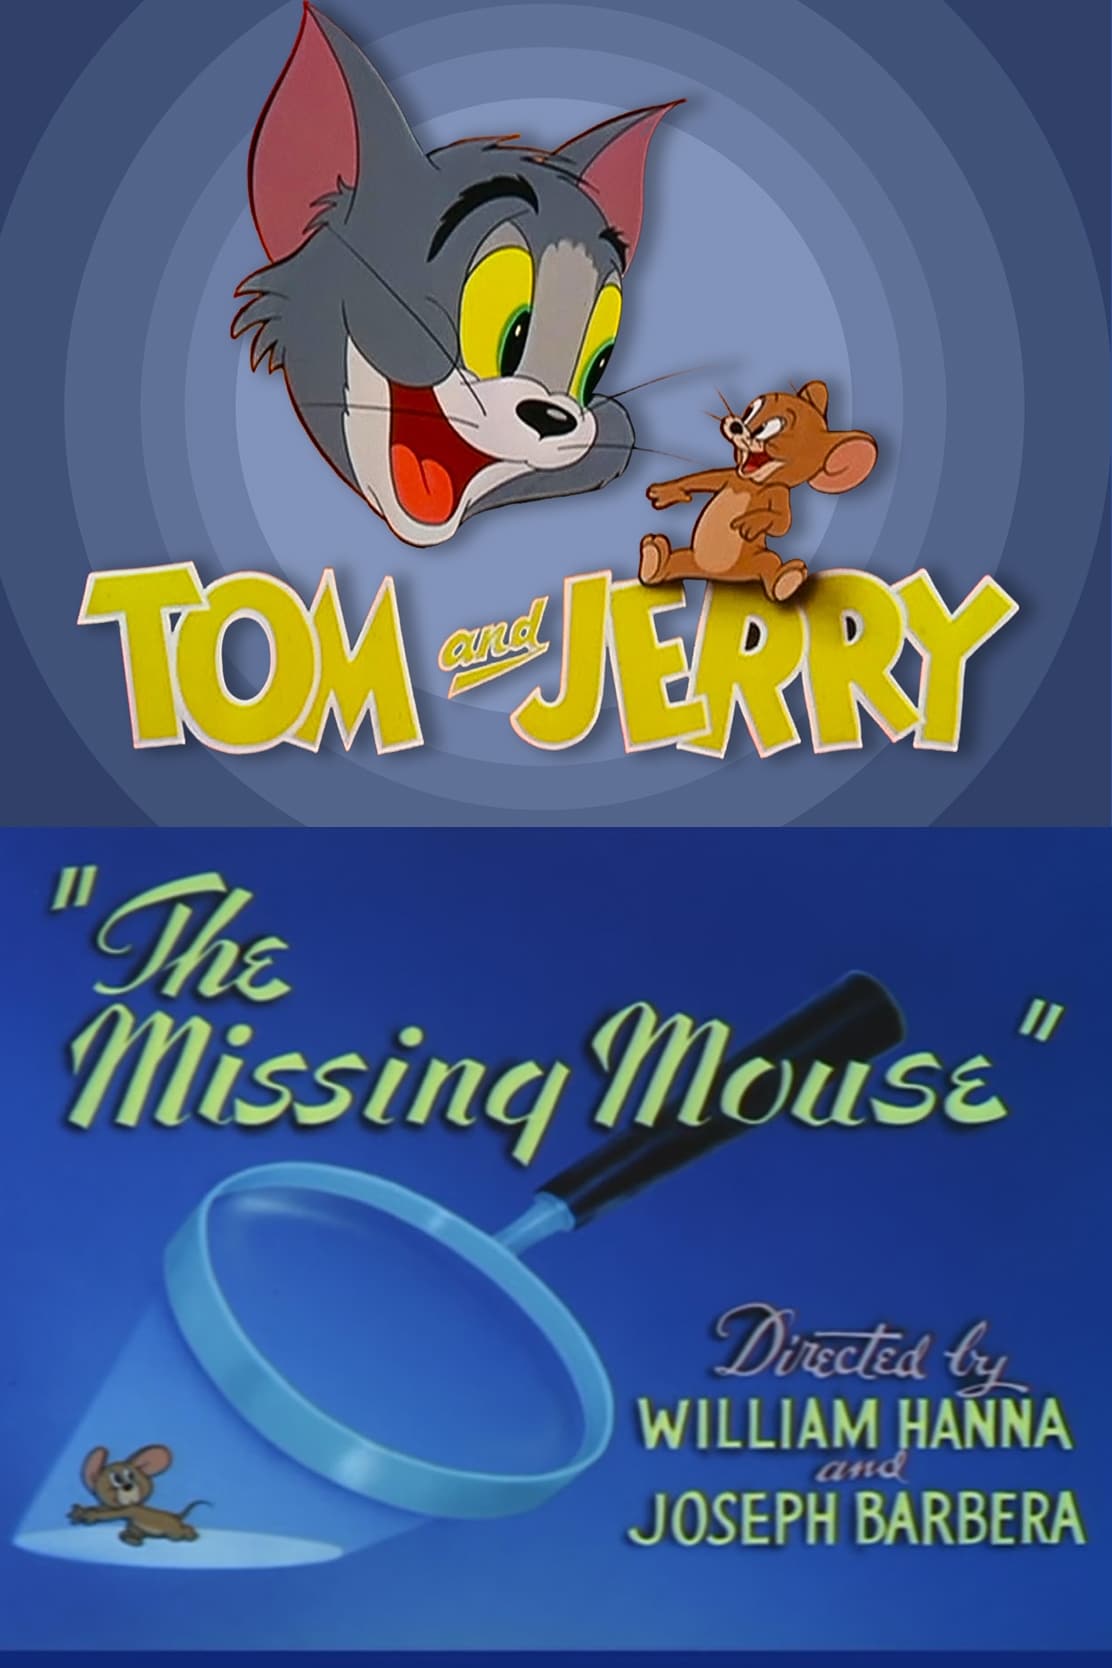 The Missing Mouse (1953)